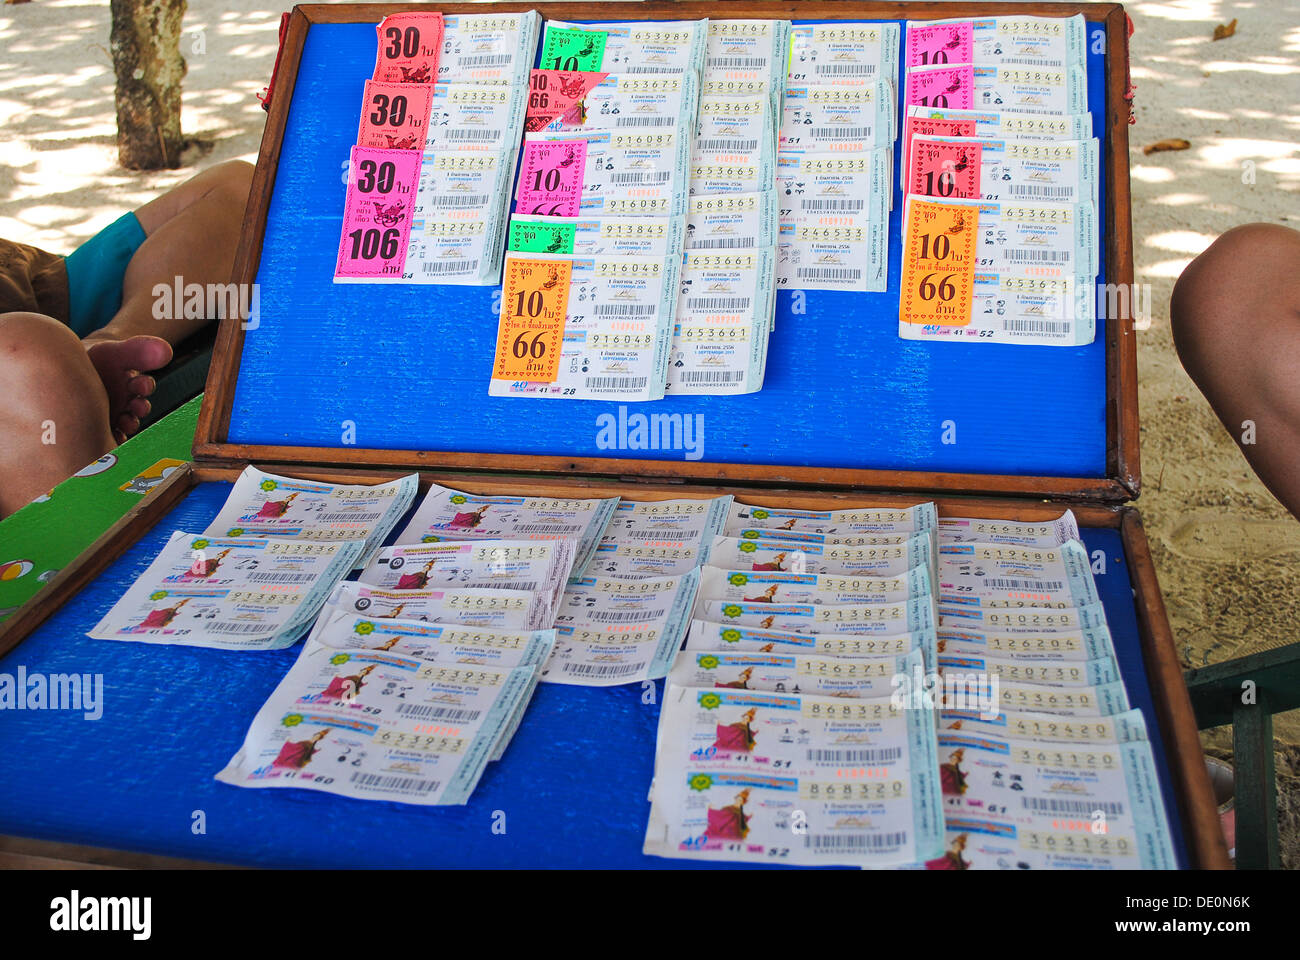 Lottery game thai Thailand lottery